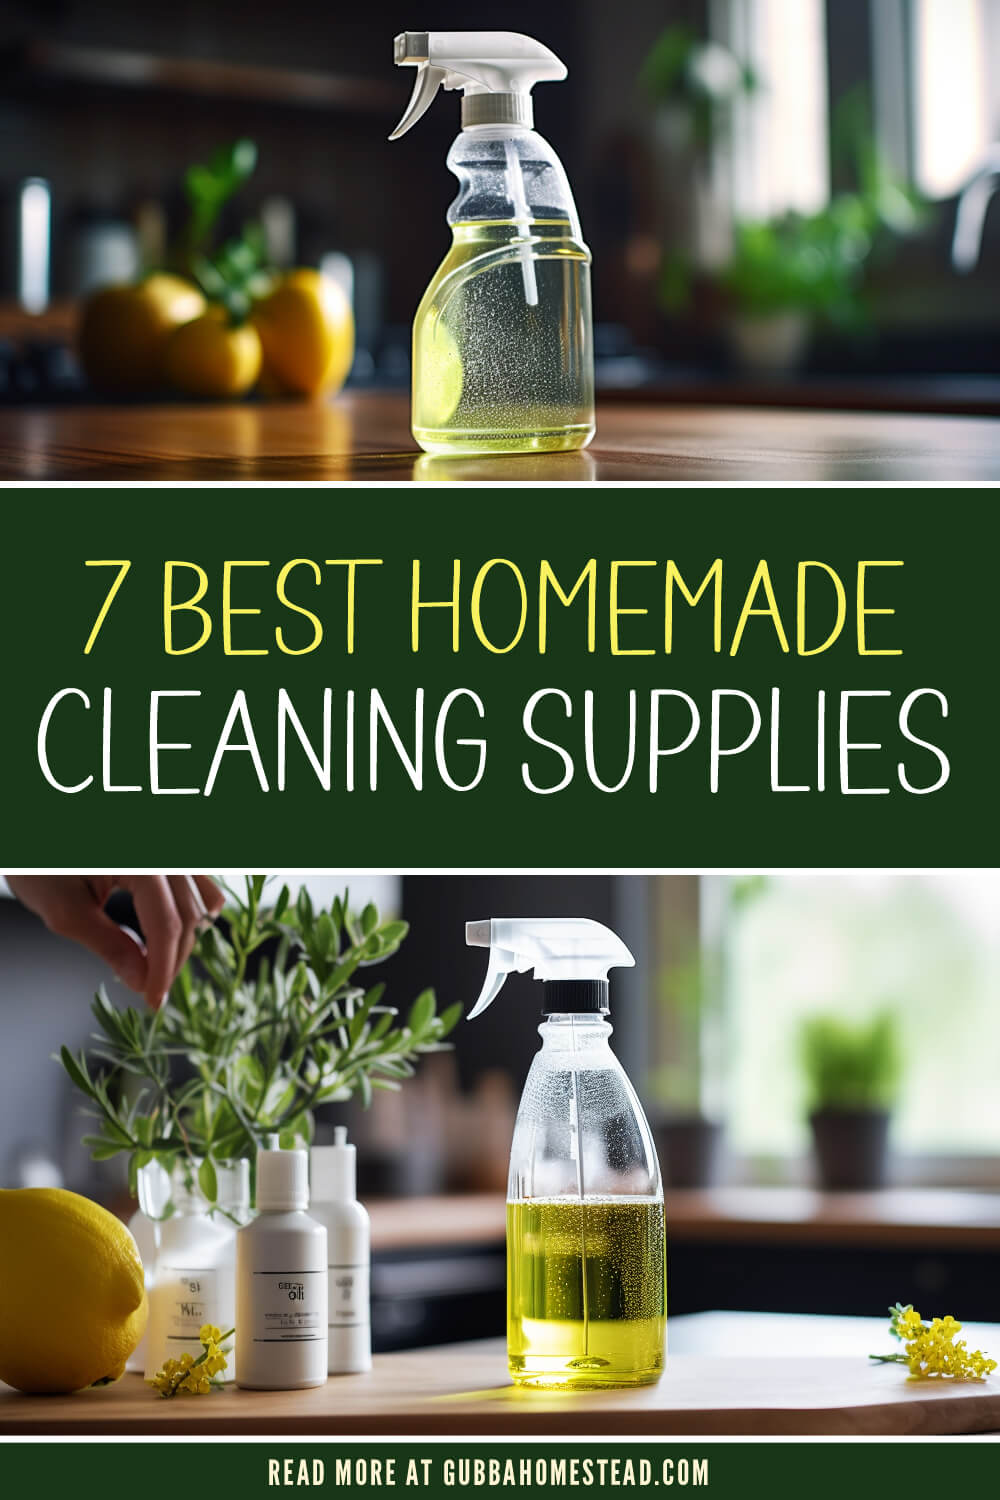 7 Best Homemade Cleaning Supplies